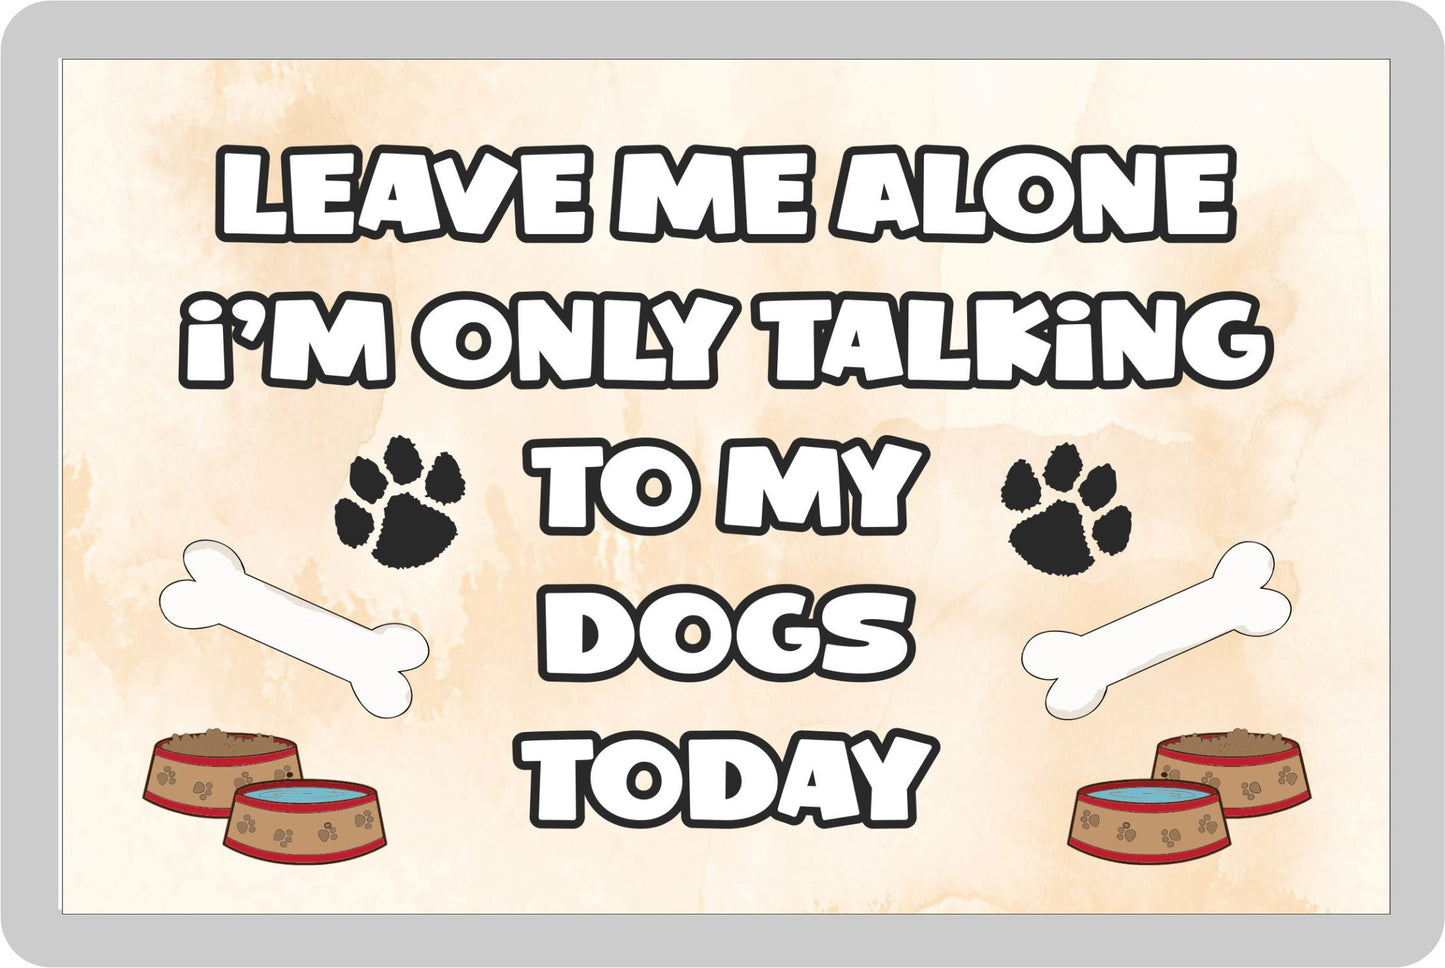 Dog Fridge Magnet Gift - Leave Me Alone I'm Only Talking To My * Today - Novelty Cute Bird Animal Present